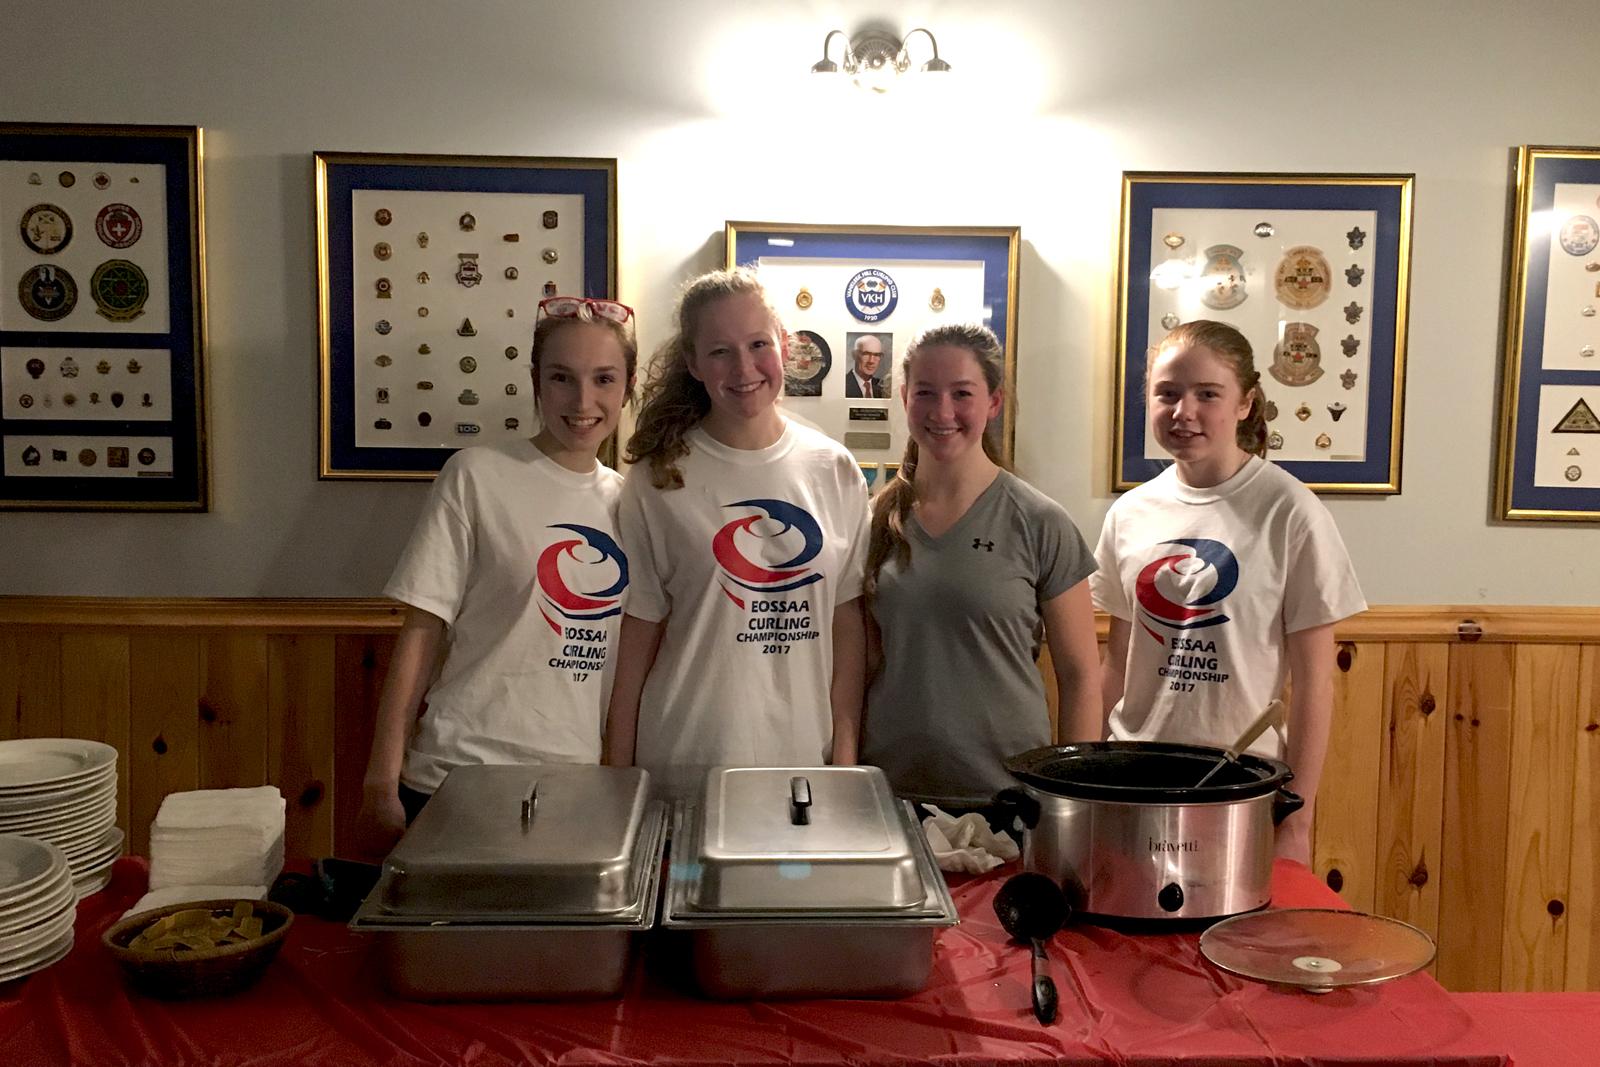 Spaghetti dinner raises $2,500 to send VCI Rebels Curling Team to the provincials